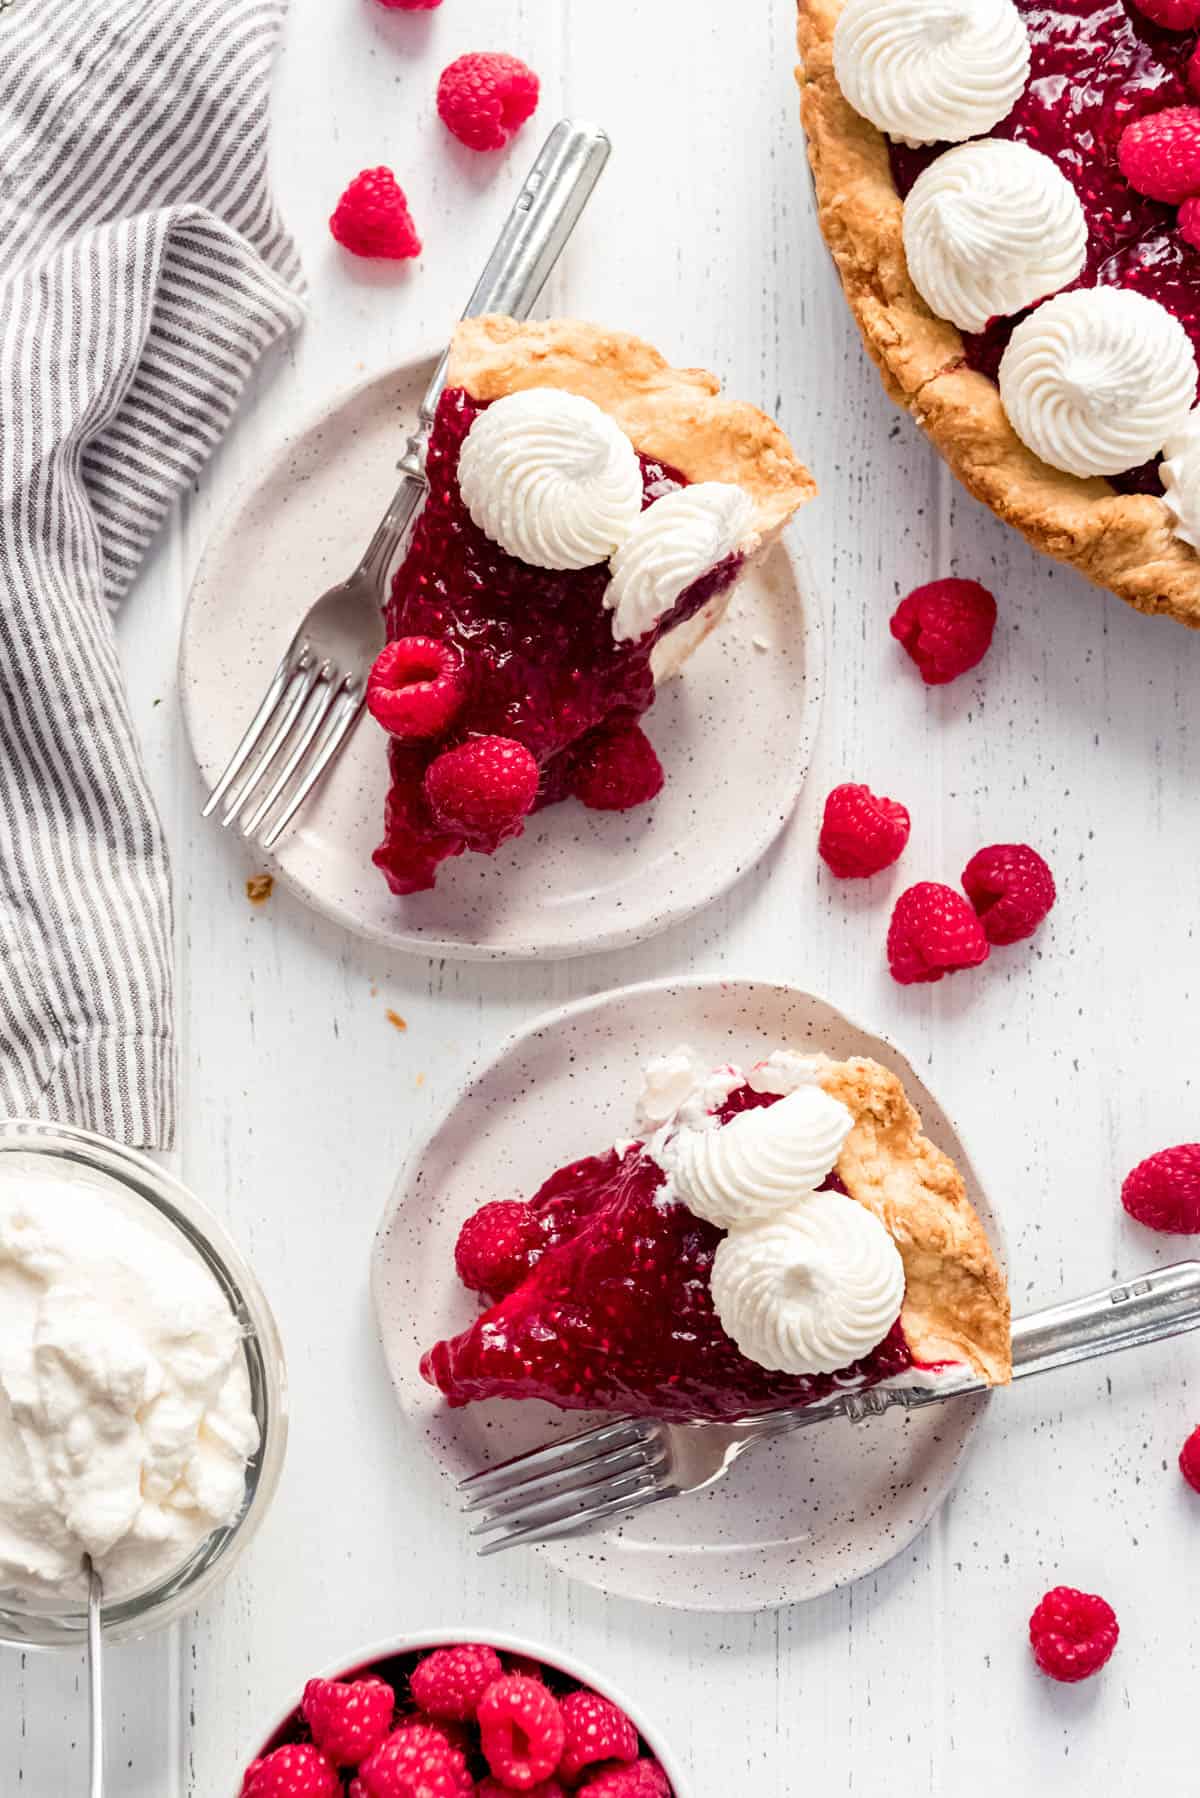 slices of raspberry cheesecake pie on plates with forks